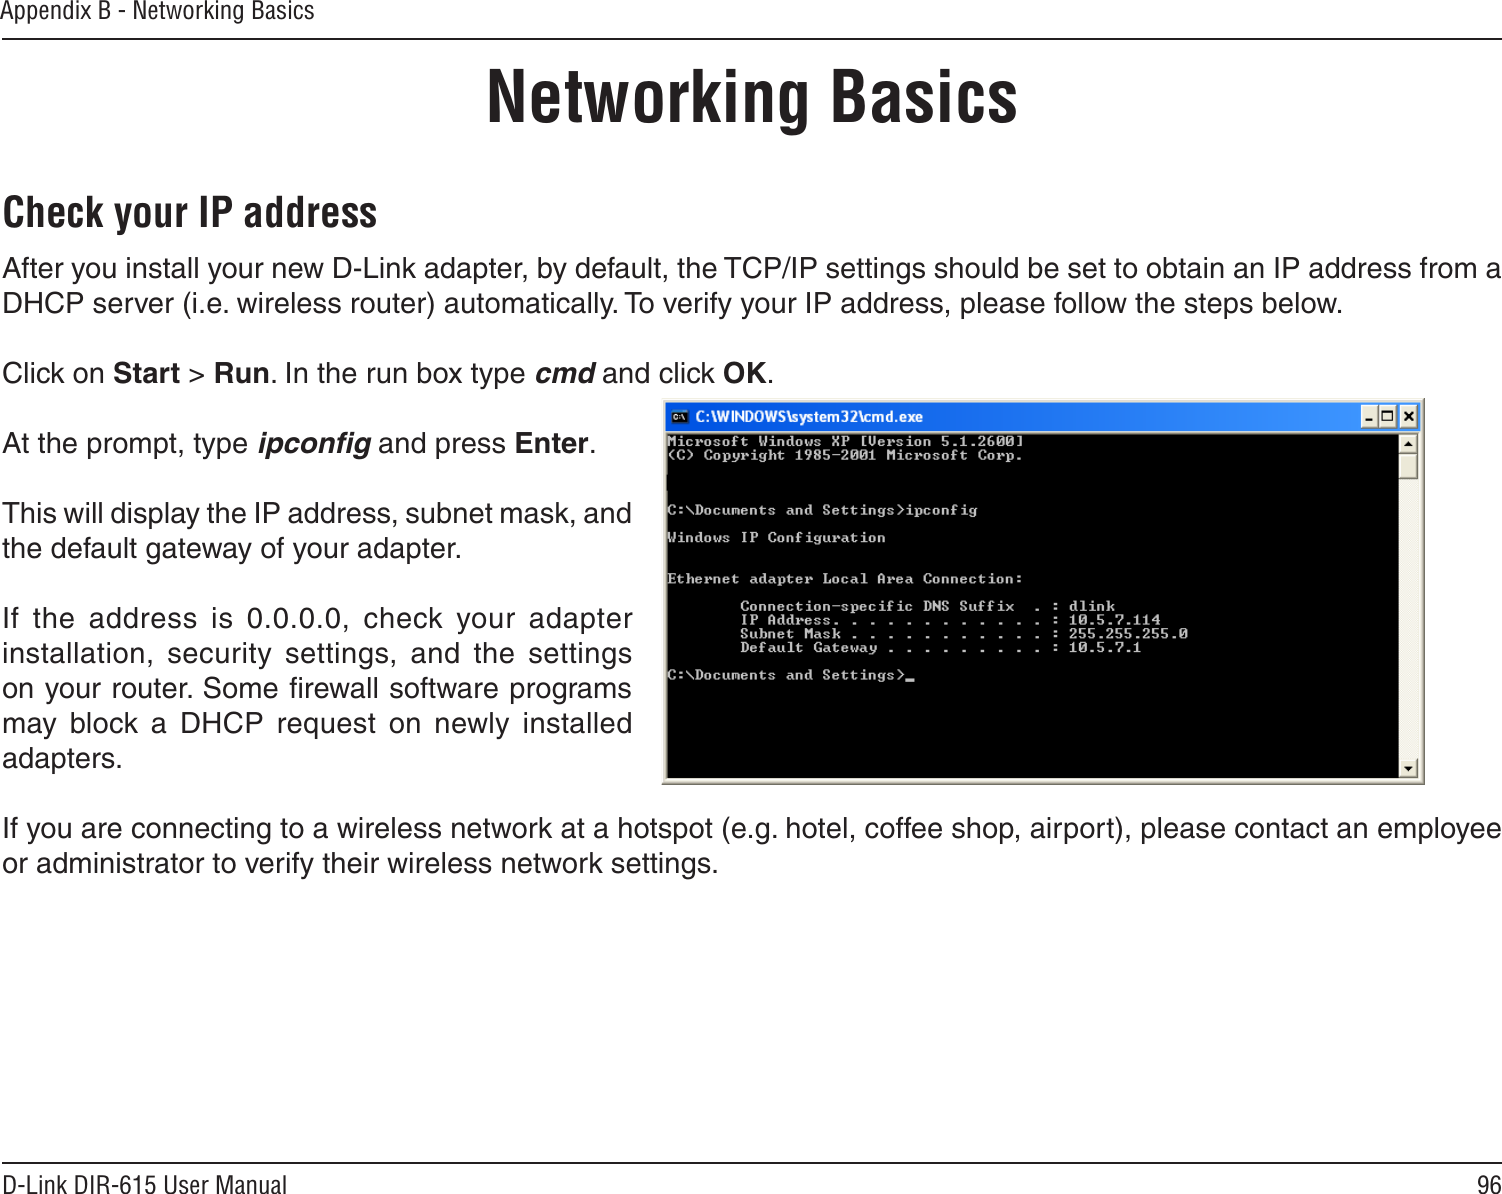 96D-Link DIR-615 User ManualAppendix B - Networking BasicsNetworking BasicsCheck your IP addressAfter you install your new D-Link adapter, by default, the TCP/IP settings should be set to obtain an IP address from a DHCP server (i.e. wireless router) automatically. To verify your IP address, please follow the steps below.Click on Start &gt; Run. In the run box type cmd and click OK.At the prompt, type ipconﬁg and press Enter.This will display the IP address, subnet mask, and the default gateway of your adapter.If  the  address  is  0.0.0.0,  check  your  adapter installation,  security  settings,  and  the  settings on your router. Some ﬁrewall software programs may  block  a  DHCP  request  on  newly  installed adapters. If you are connecting to a wireless network at a hotspot (e.g. hotel, coffee shop, airport), please contact an employee or administrator to verify their wireless network settings.